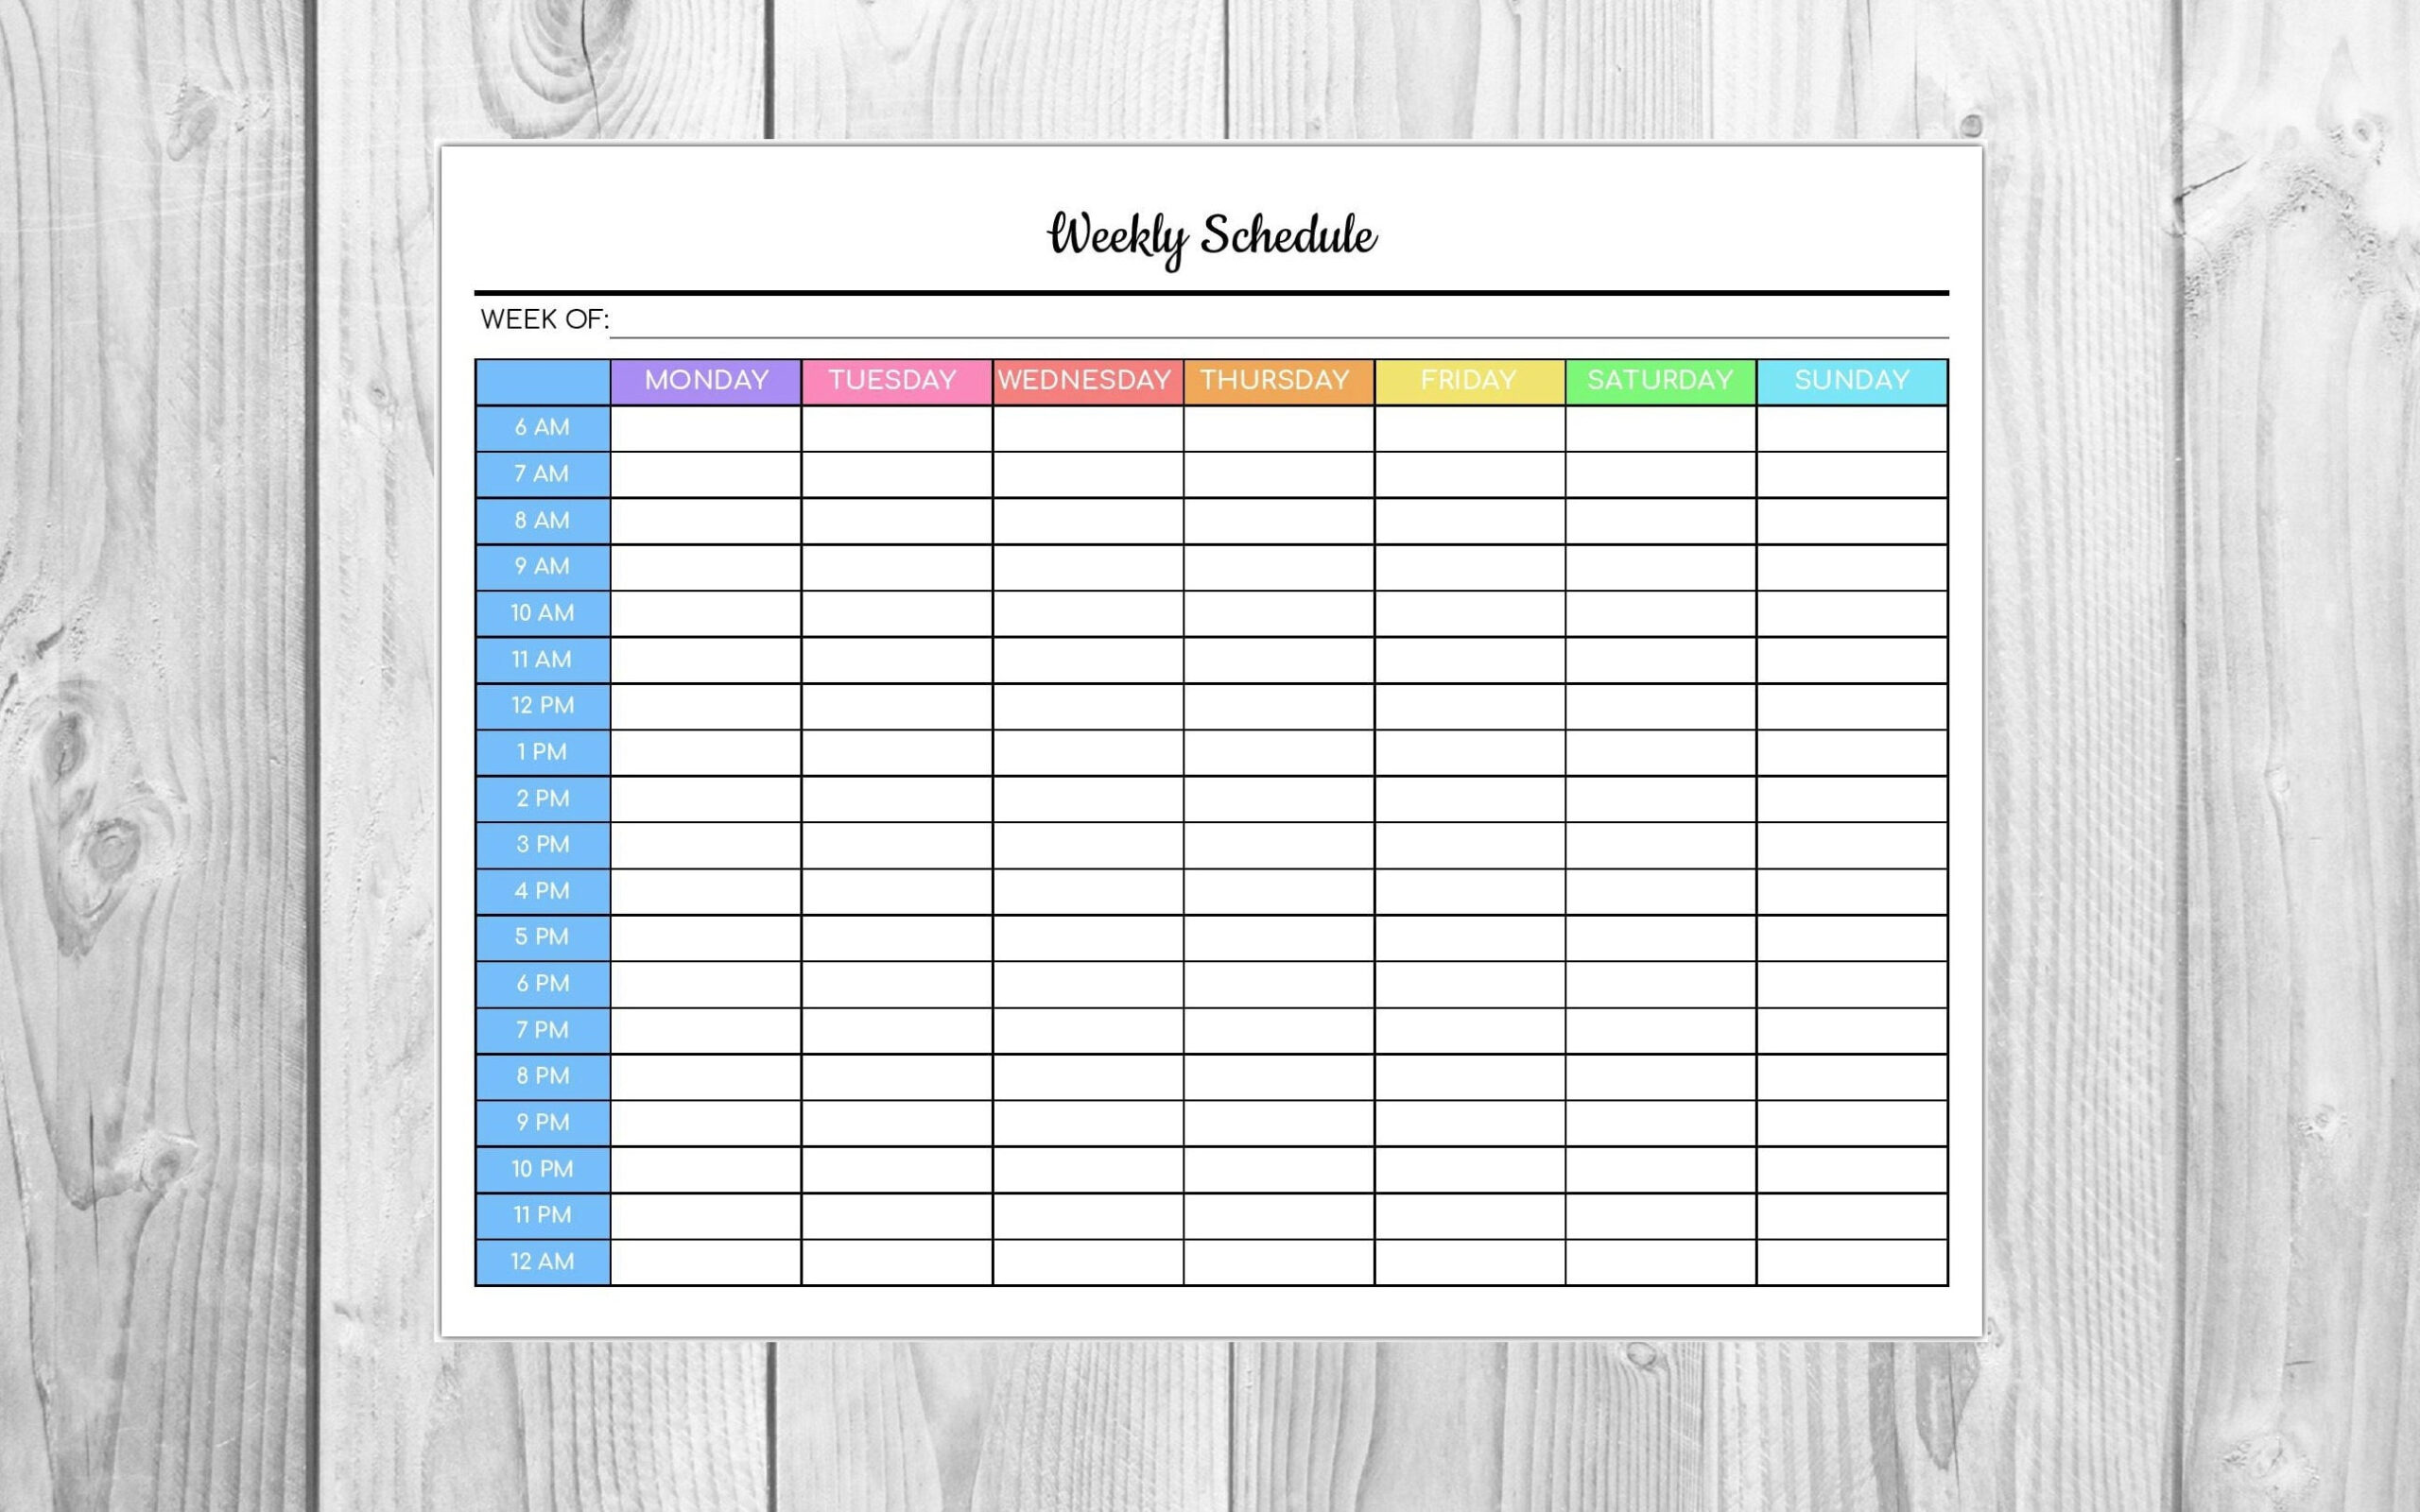 Weekly Schedule Editable Pdf Colorful Hourly Schedule | Etsy with regard to Hourly Calendar Pdf